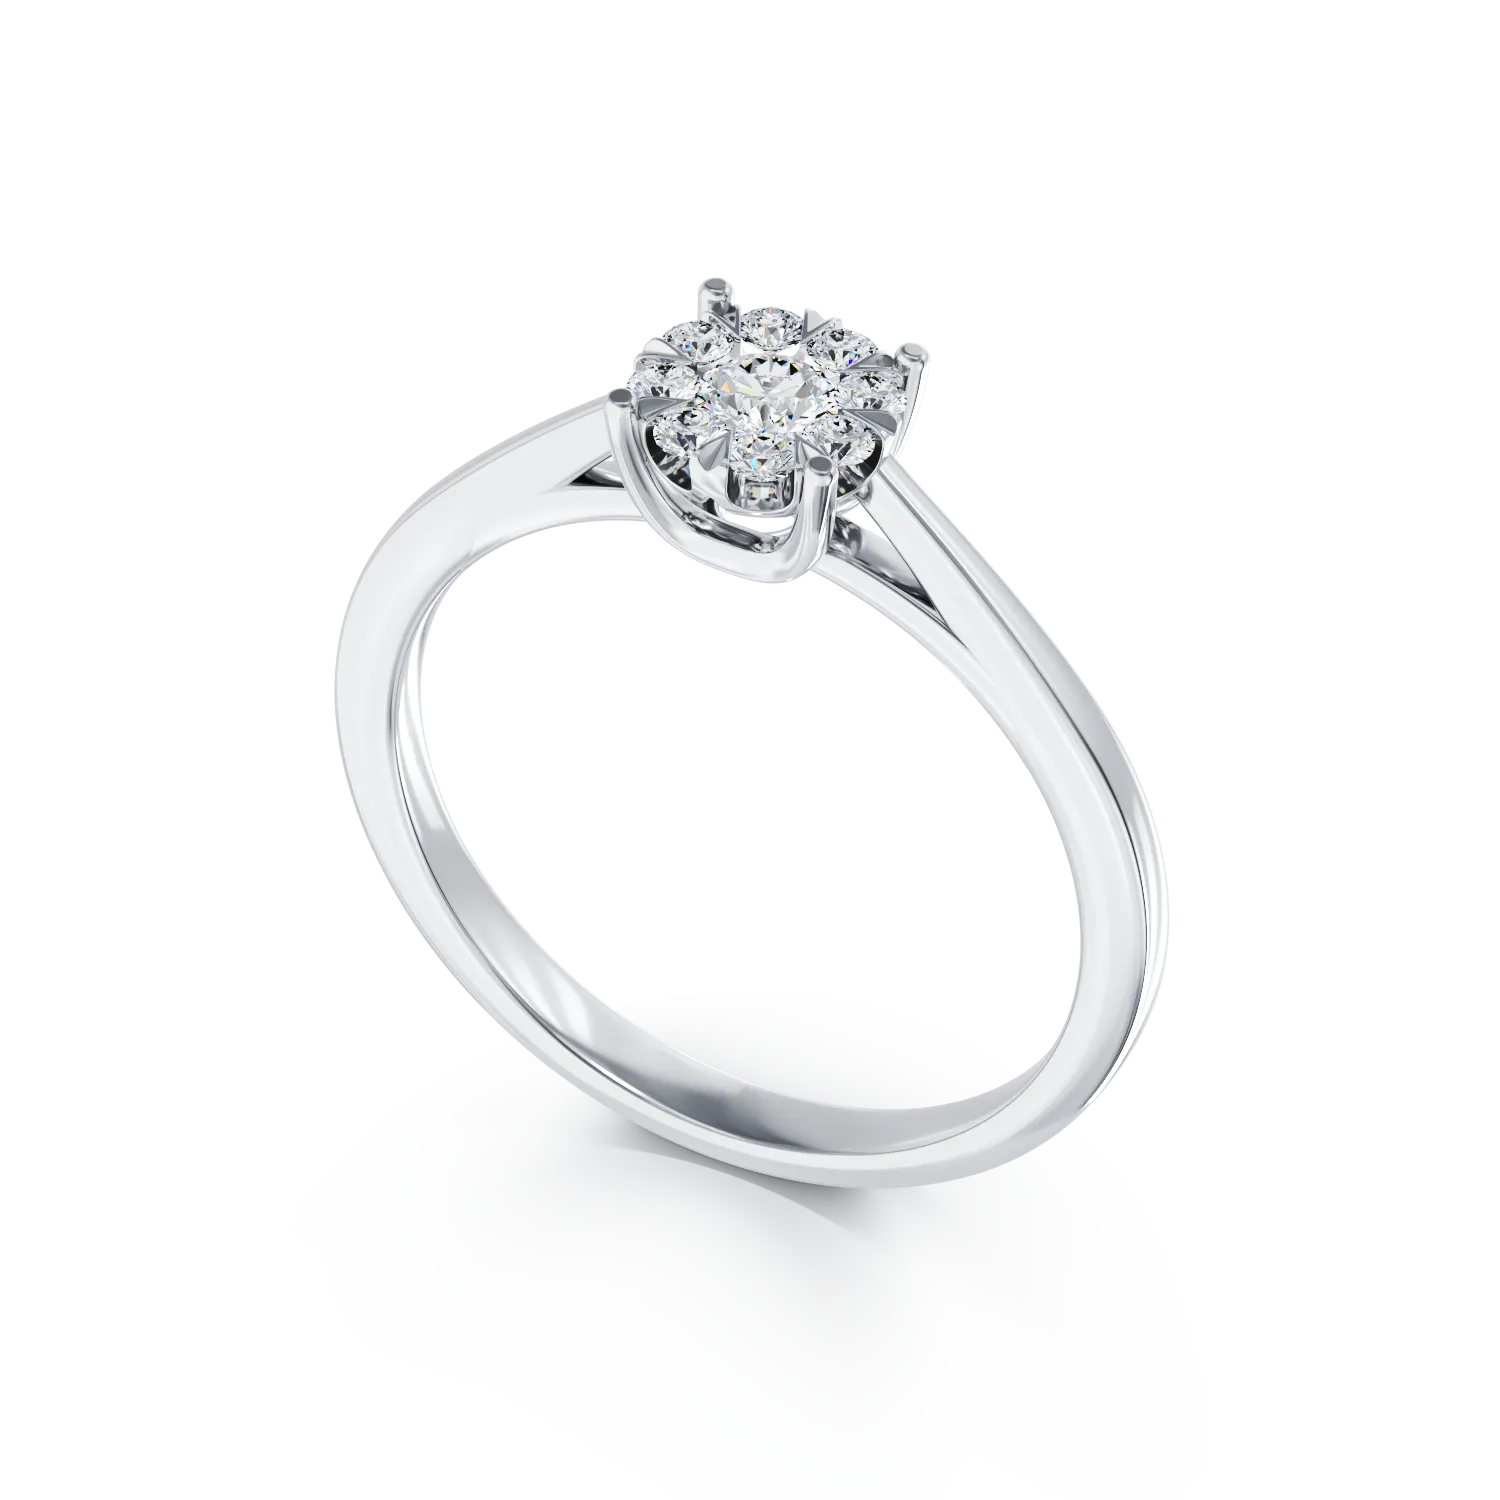 White gold engagement ring with 0.15ct diamonds